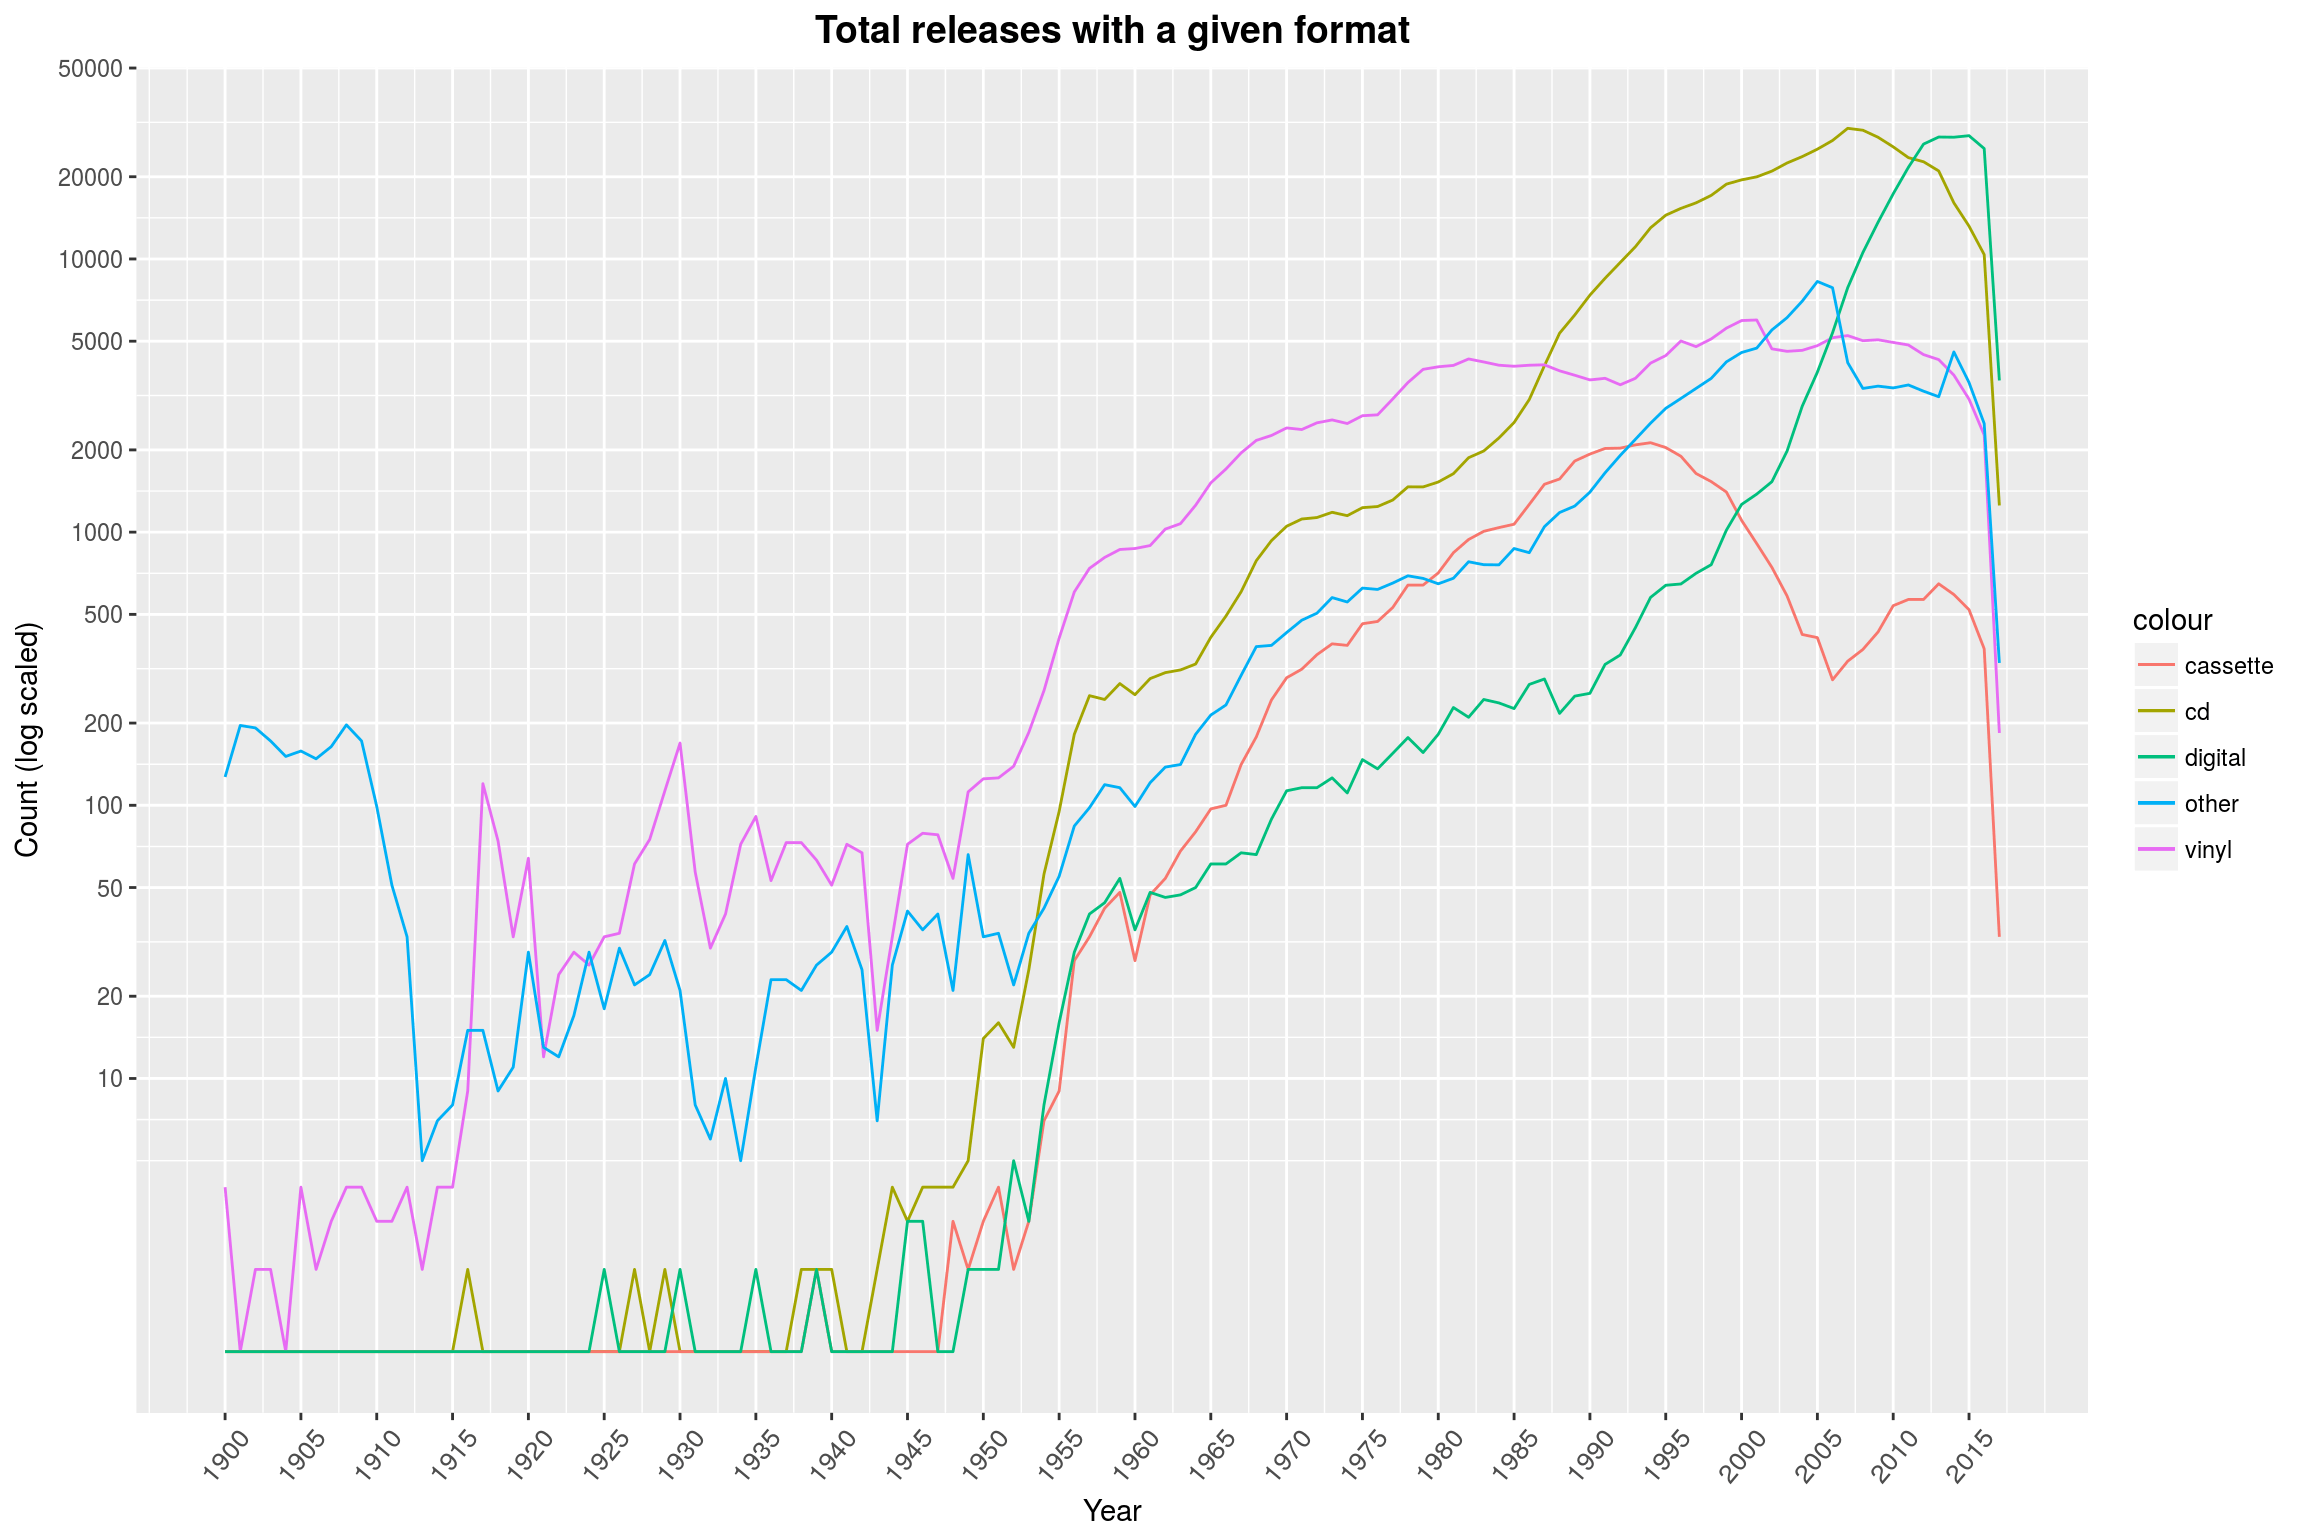 Total releases with a given format per year